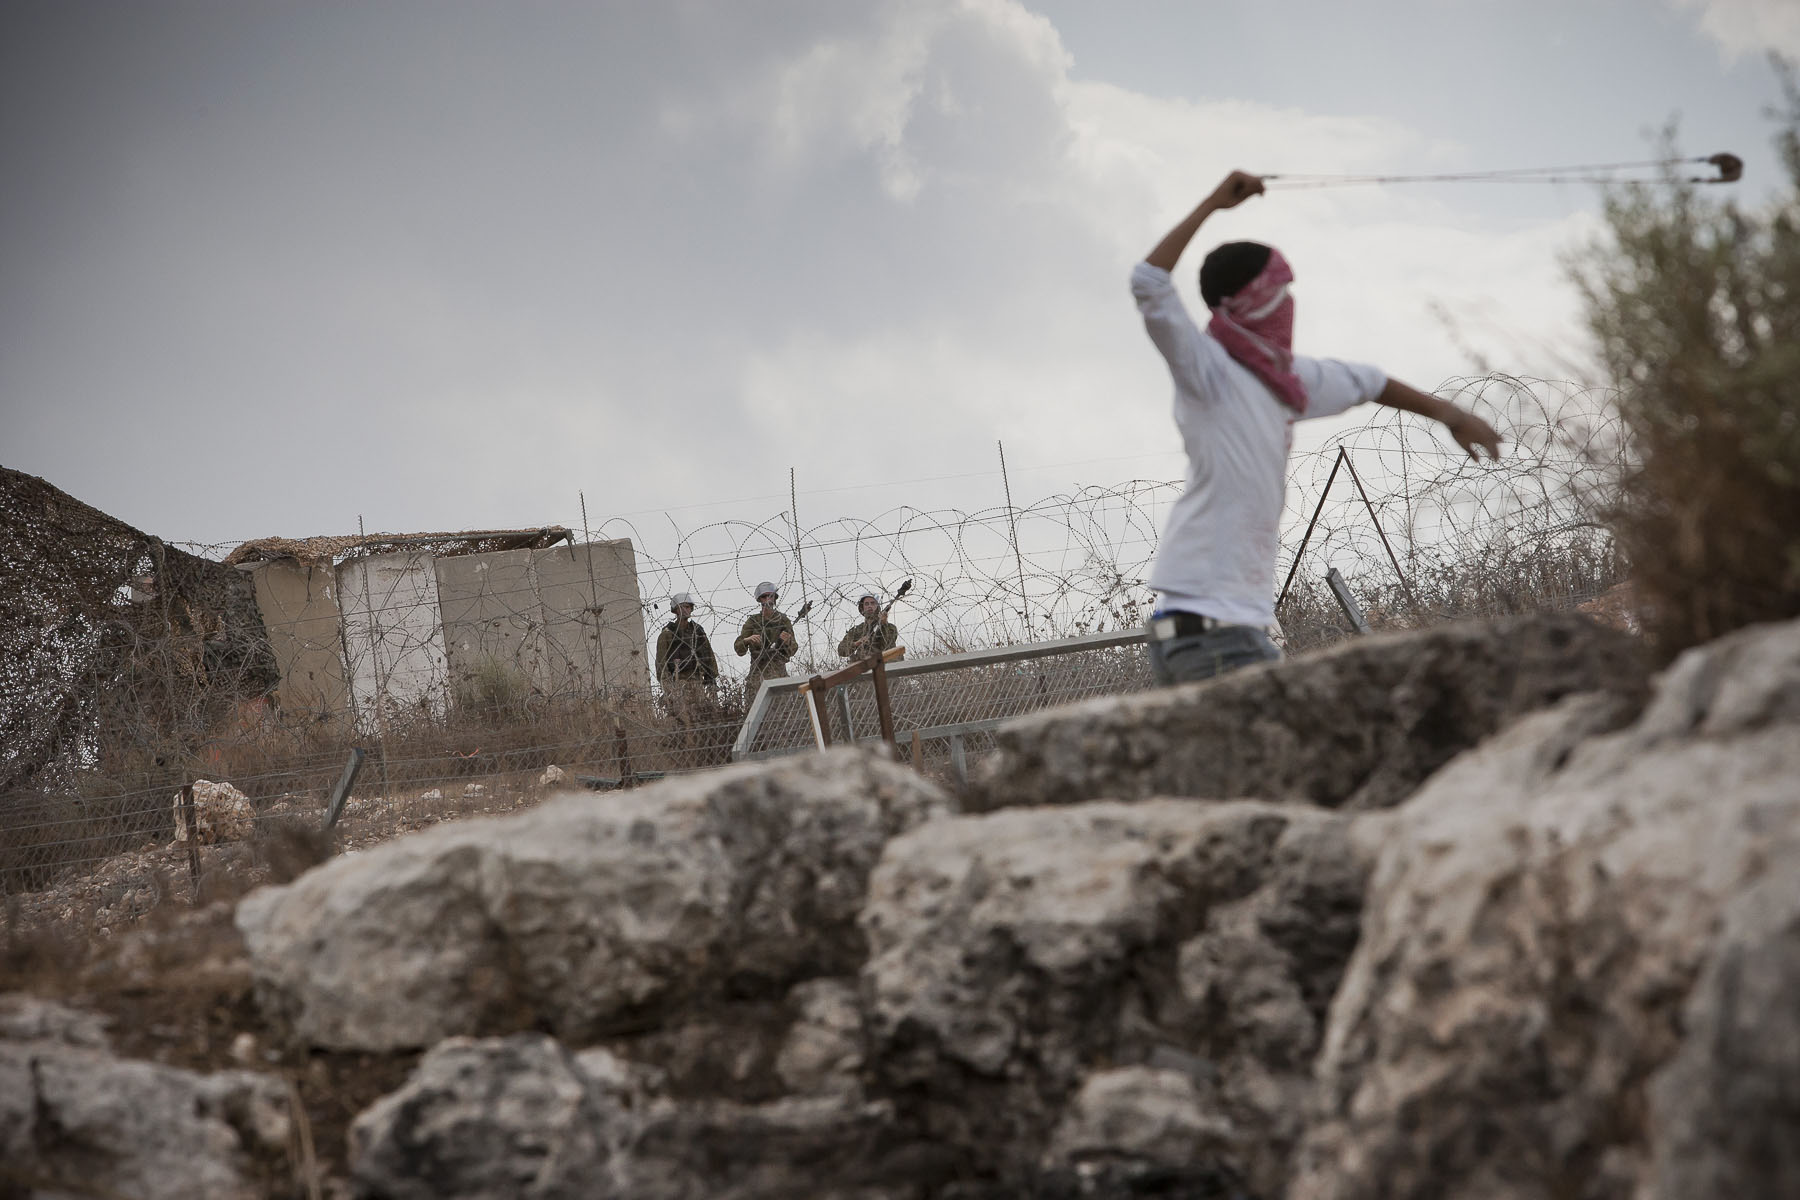 Palestinian young people demonstrates face of the Israeli separation barrier in October 2010